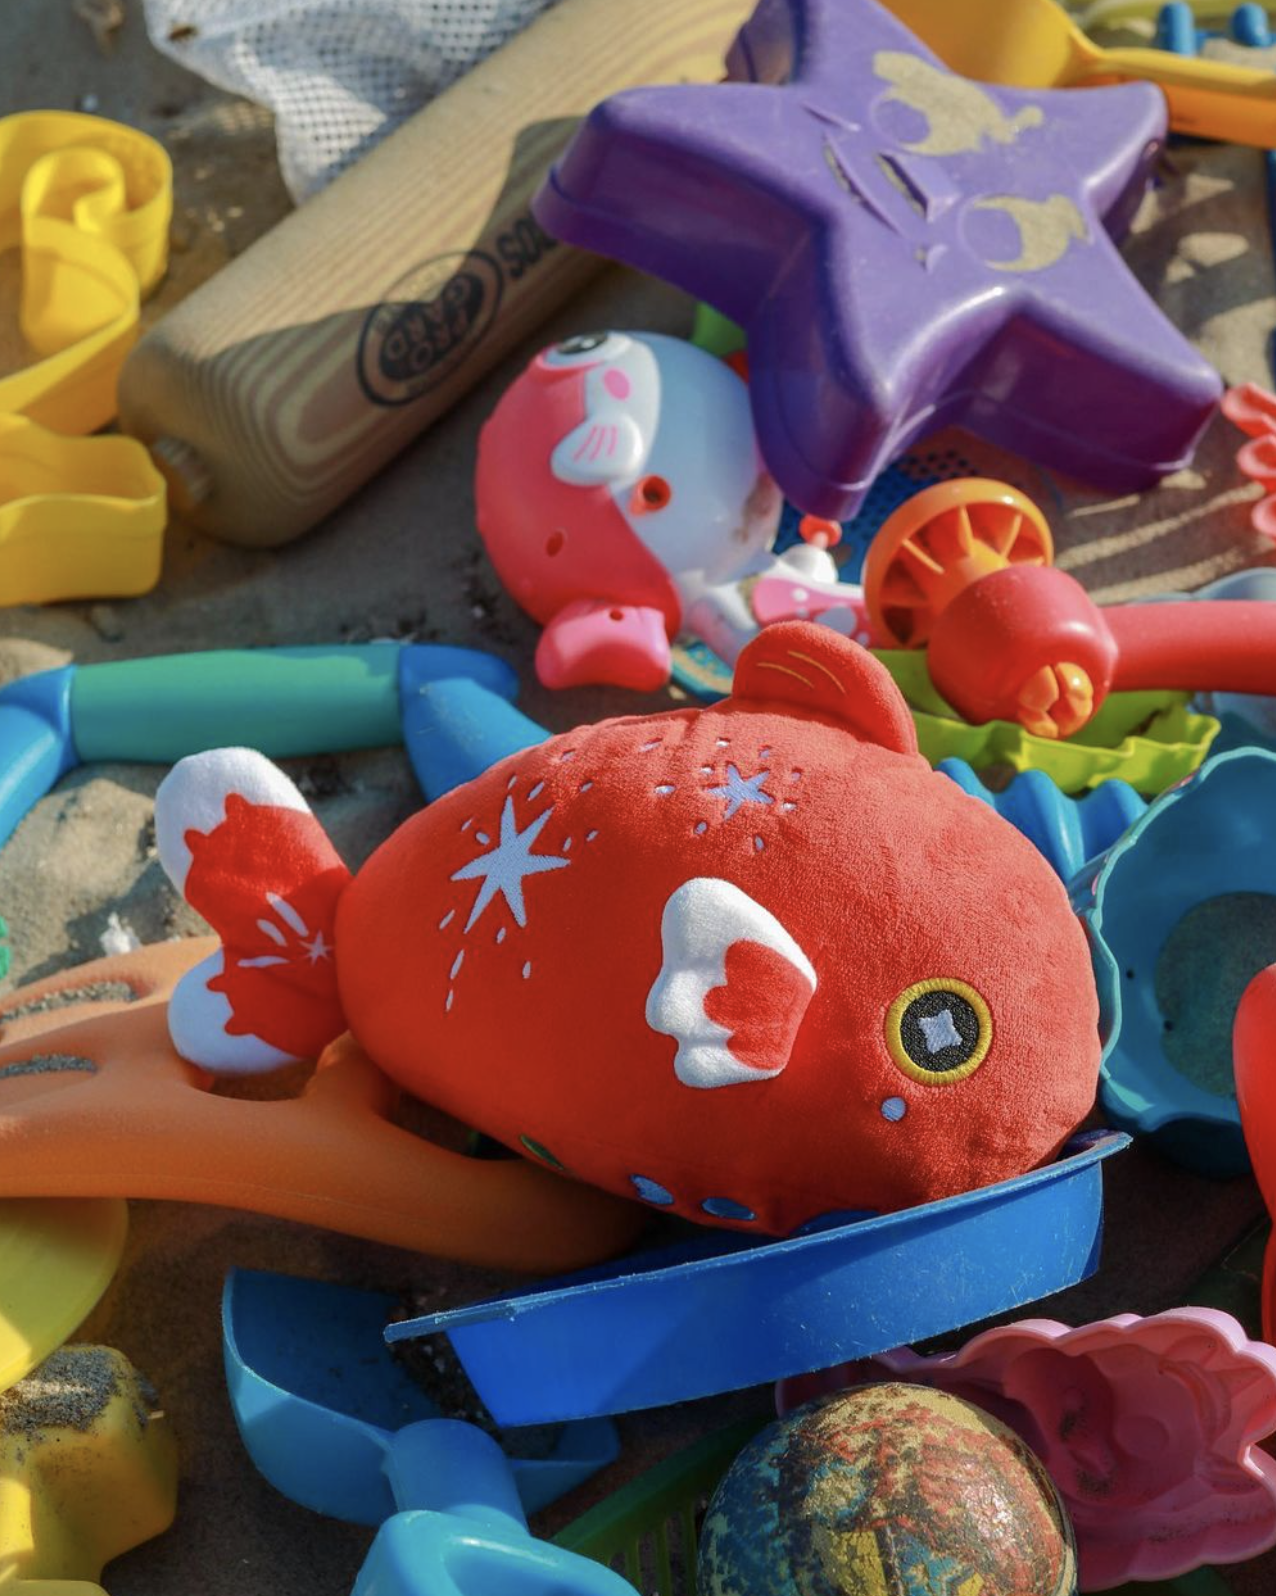 Starry Goldfish in a pile of other beach toys